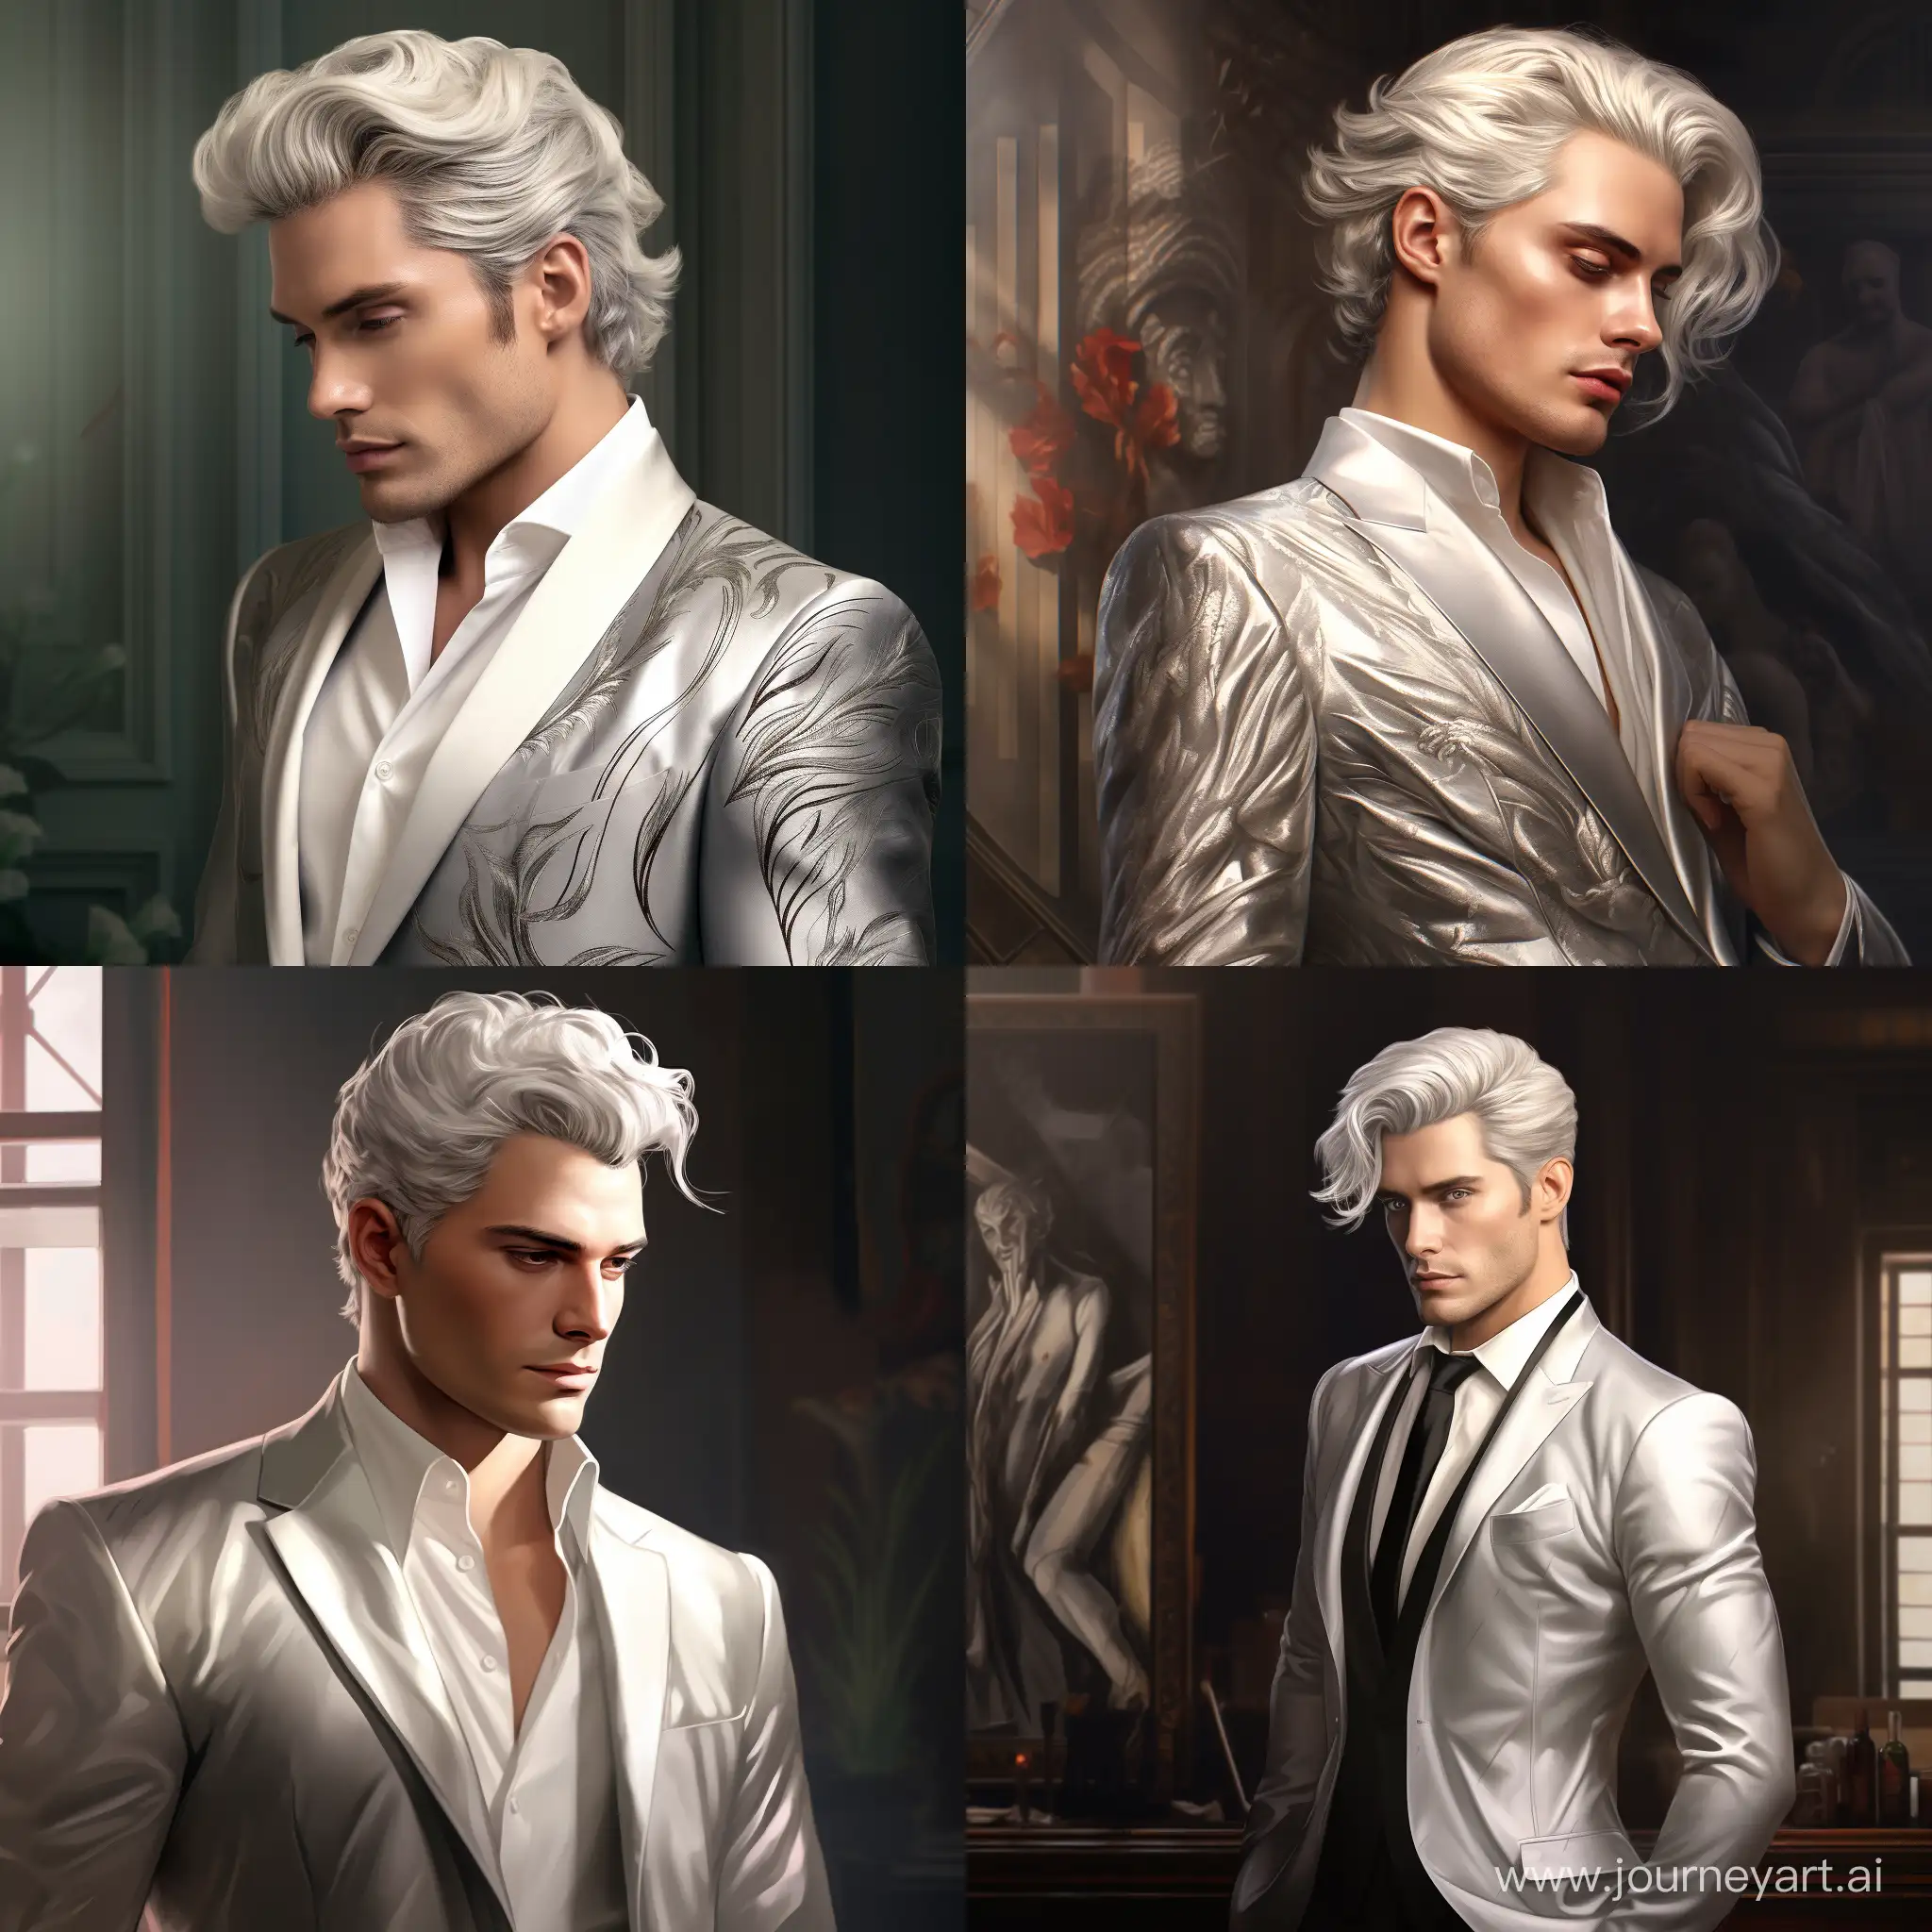 Mysterious-and-Alluring-Young-Man-in-Elegant-Gray-Suit-with-Silver-Hair